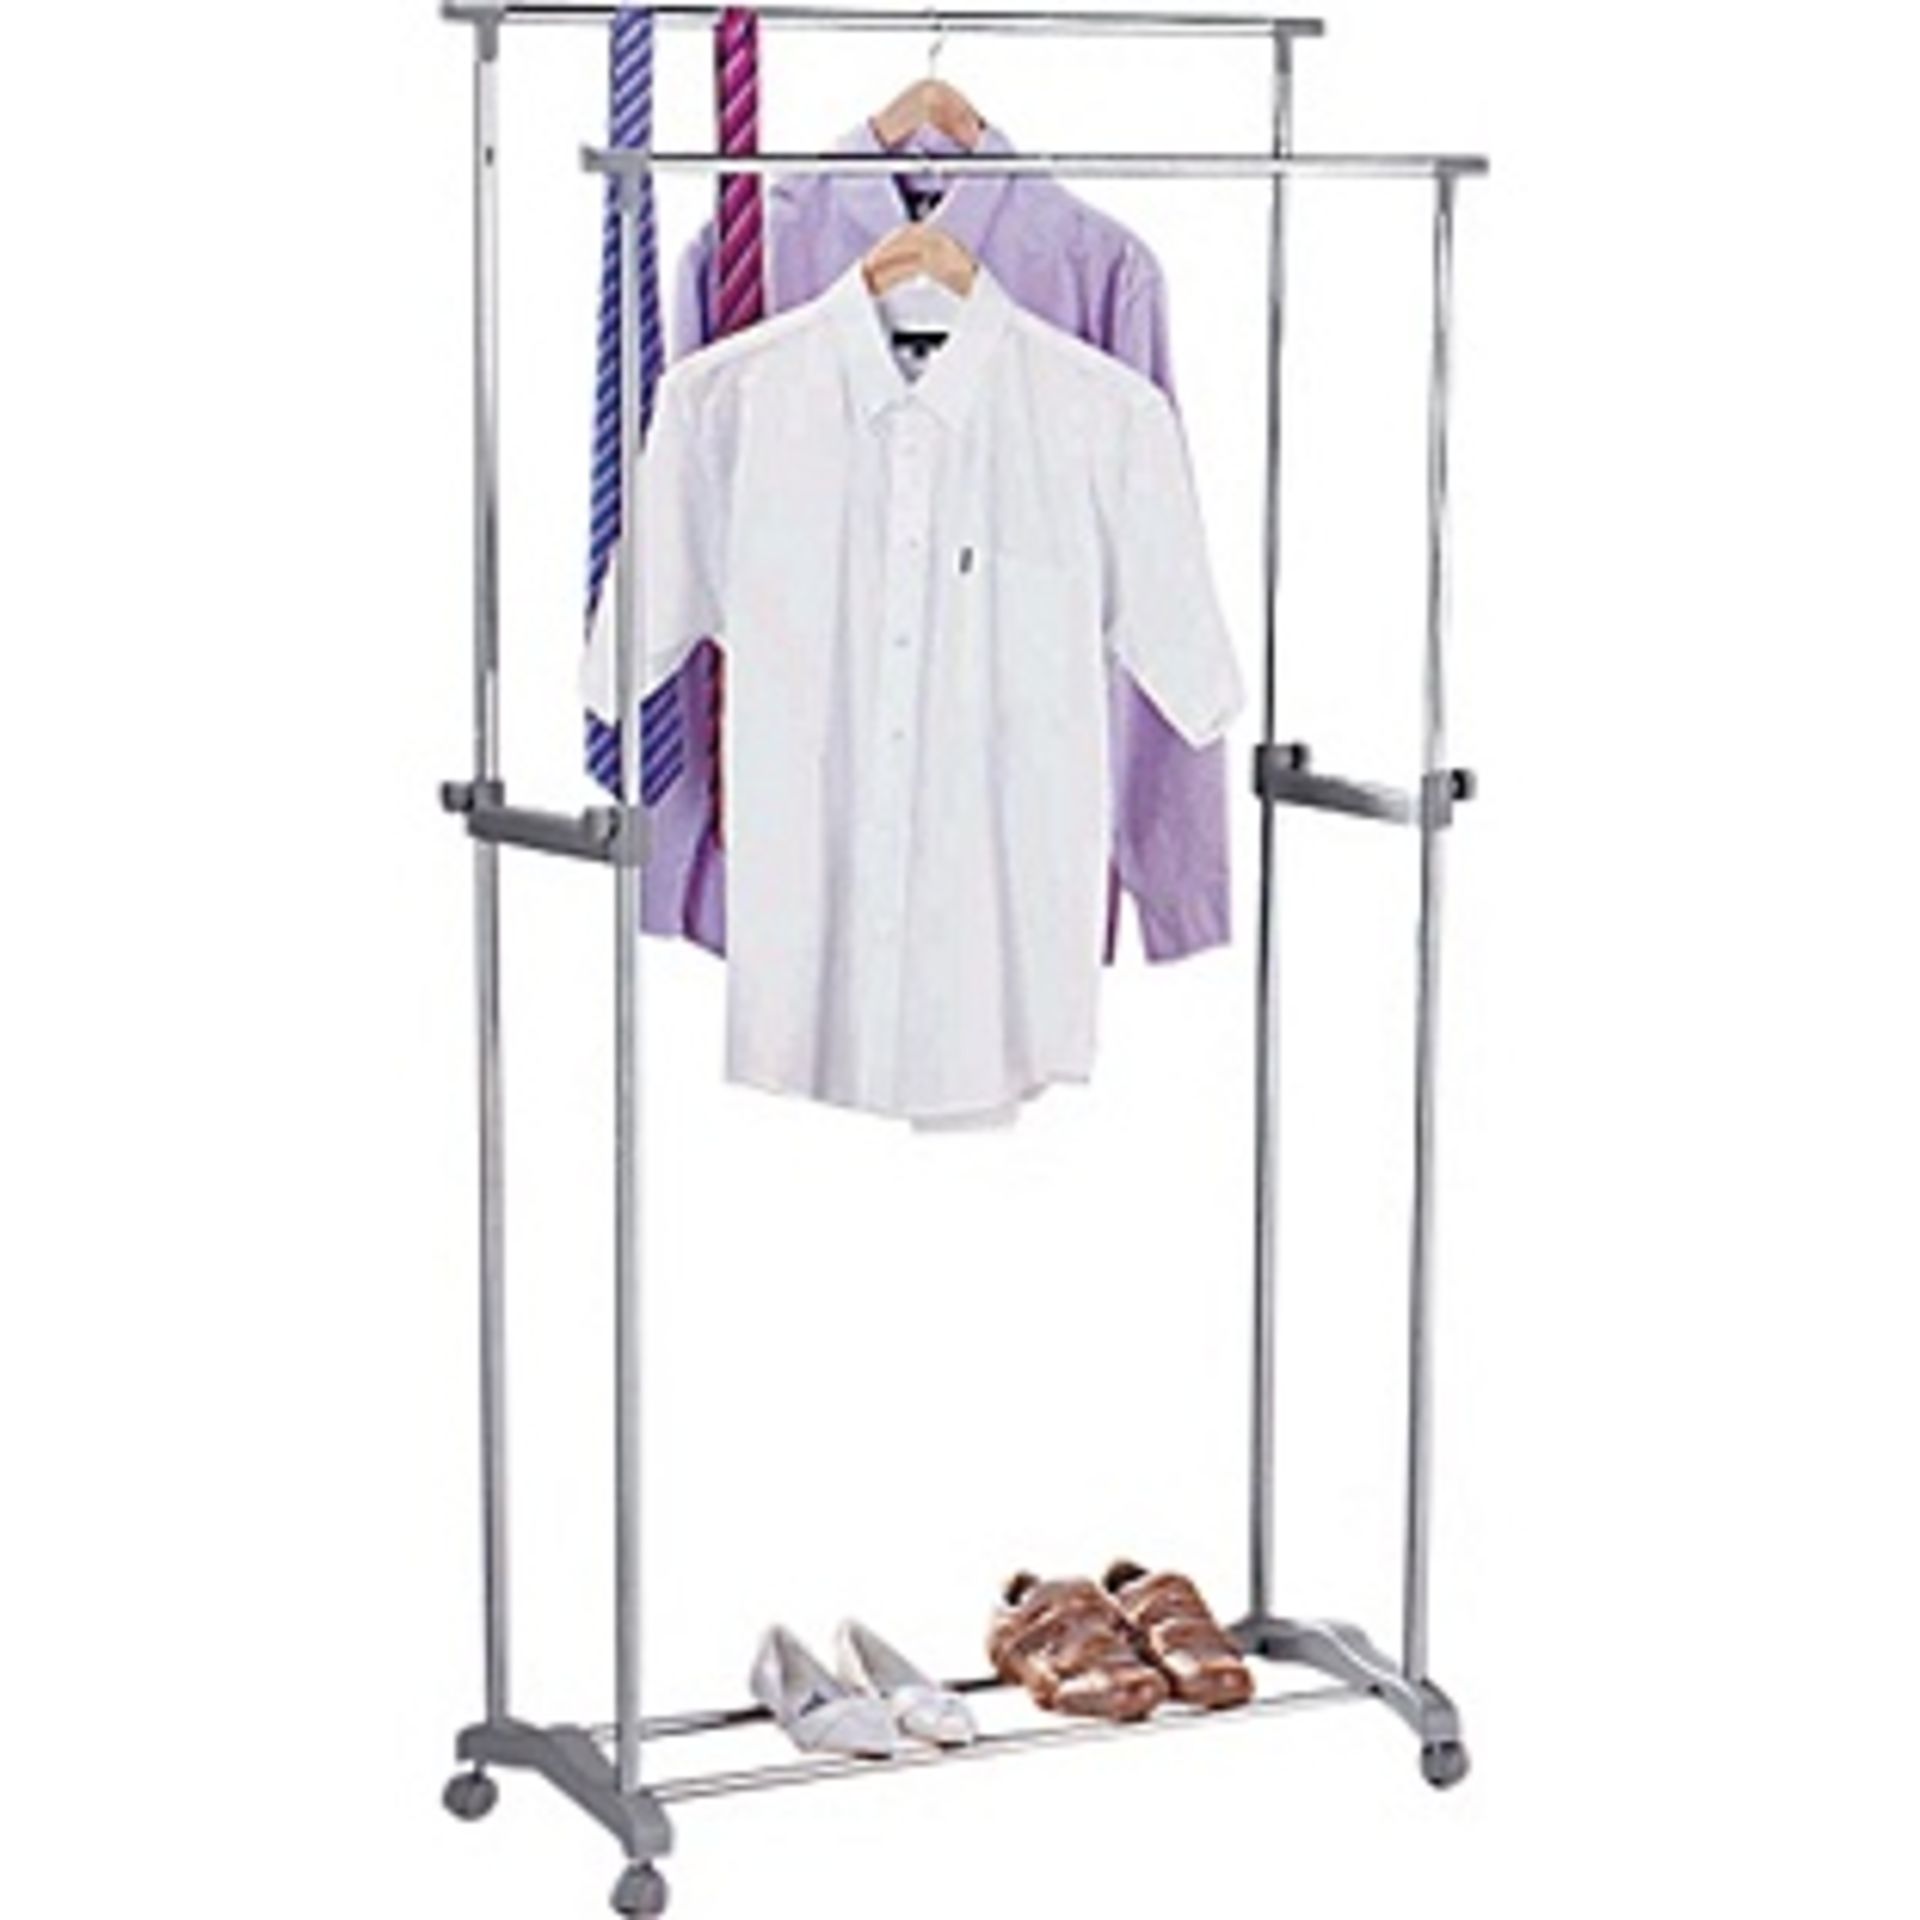 HOME Adjustable Double Clothes Rail - Silver. Size H101, extending to 167.5, W89cm. Boxed &